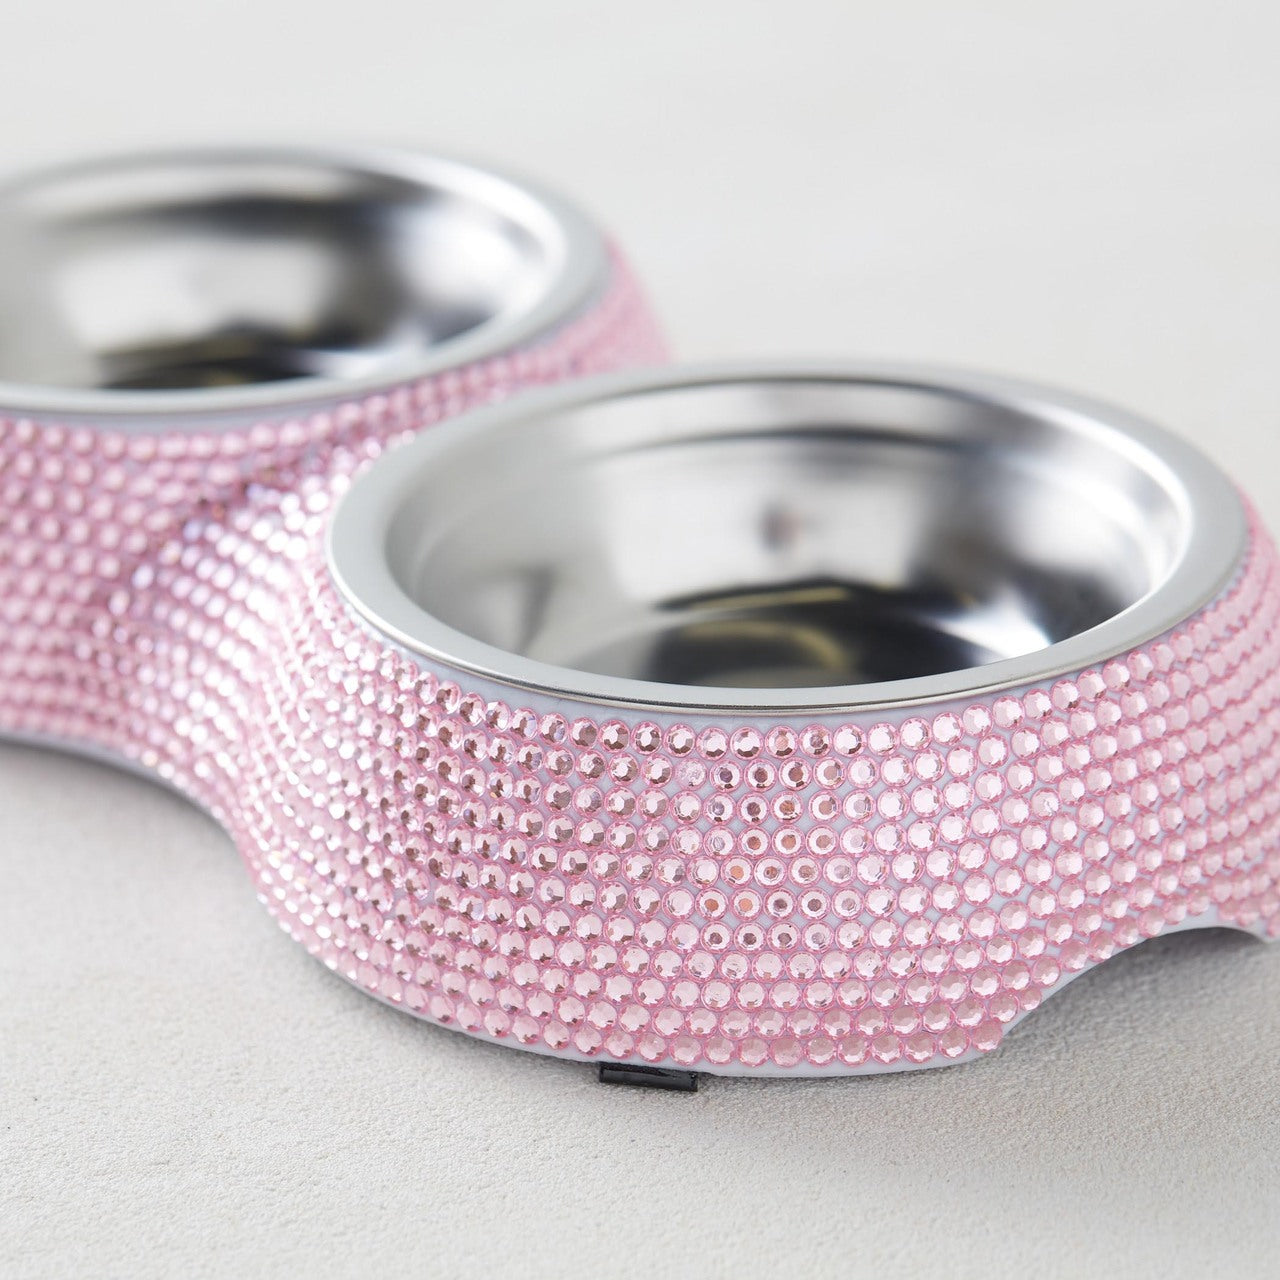 Pet Boutique - Dog Dining - Dog Bowl - Pink Crystal Dog Bowl by Hello Doggie